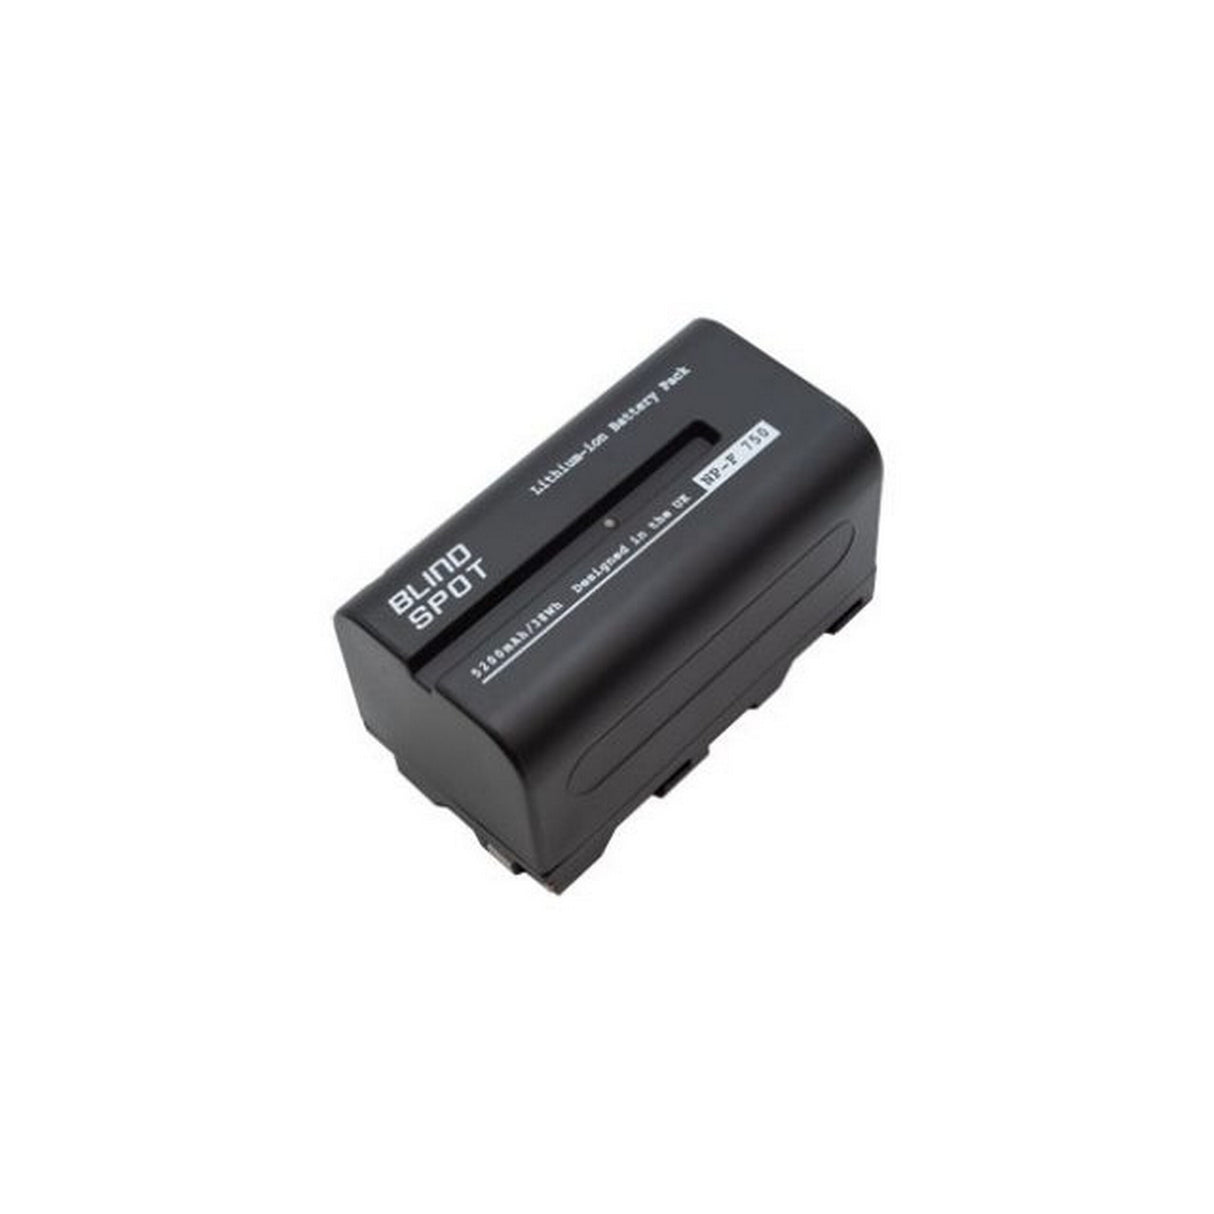 Blind Spot Gear Lithium-Ion Battery for Sony NP-F750, 1302-018-01